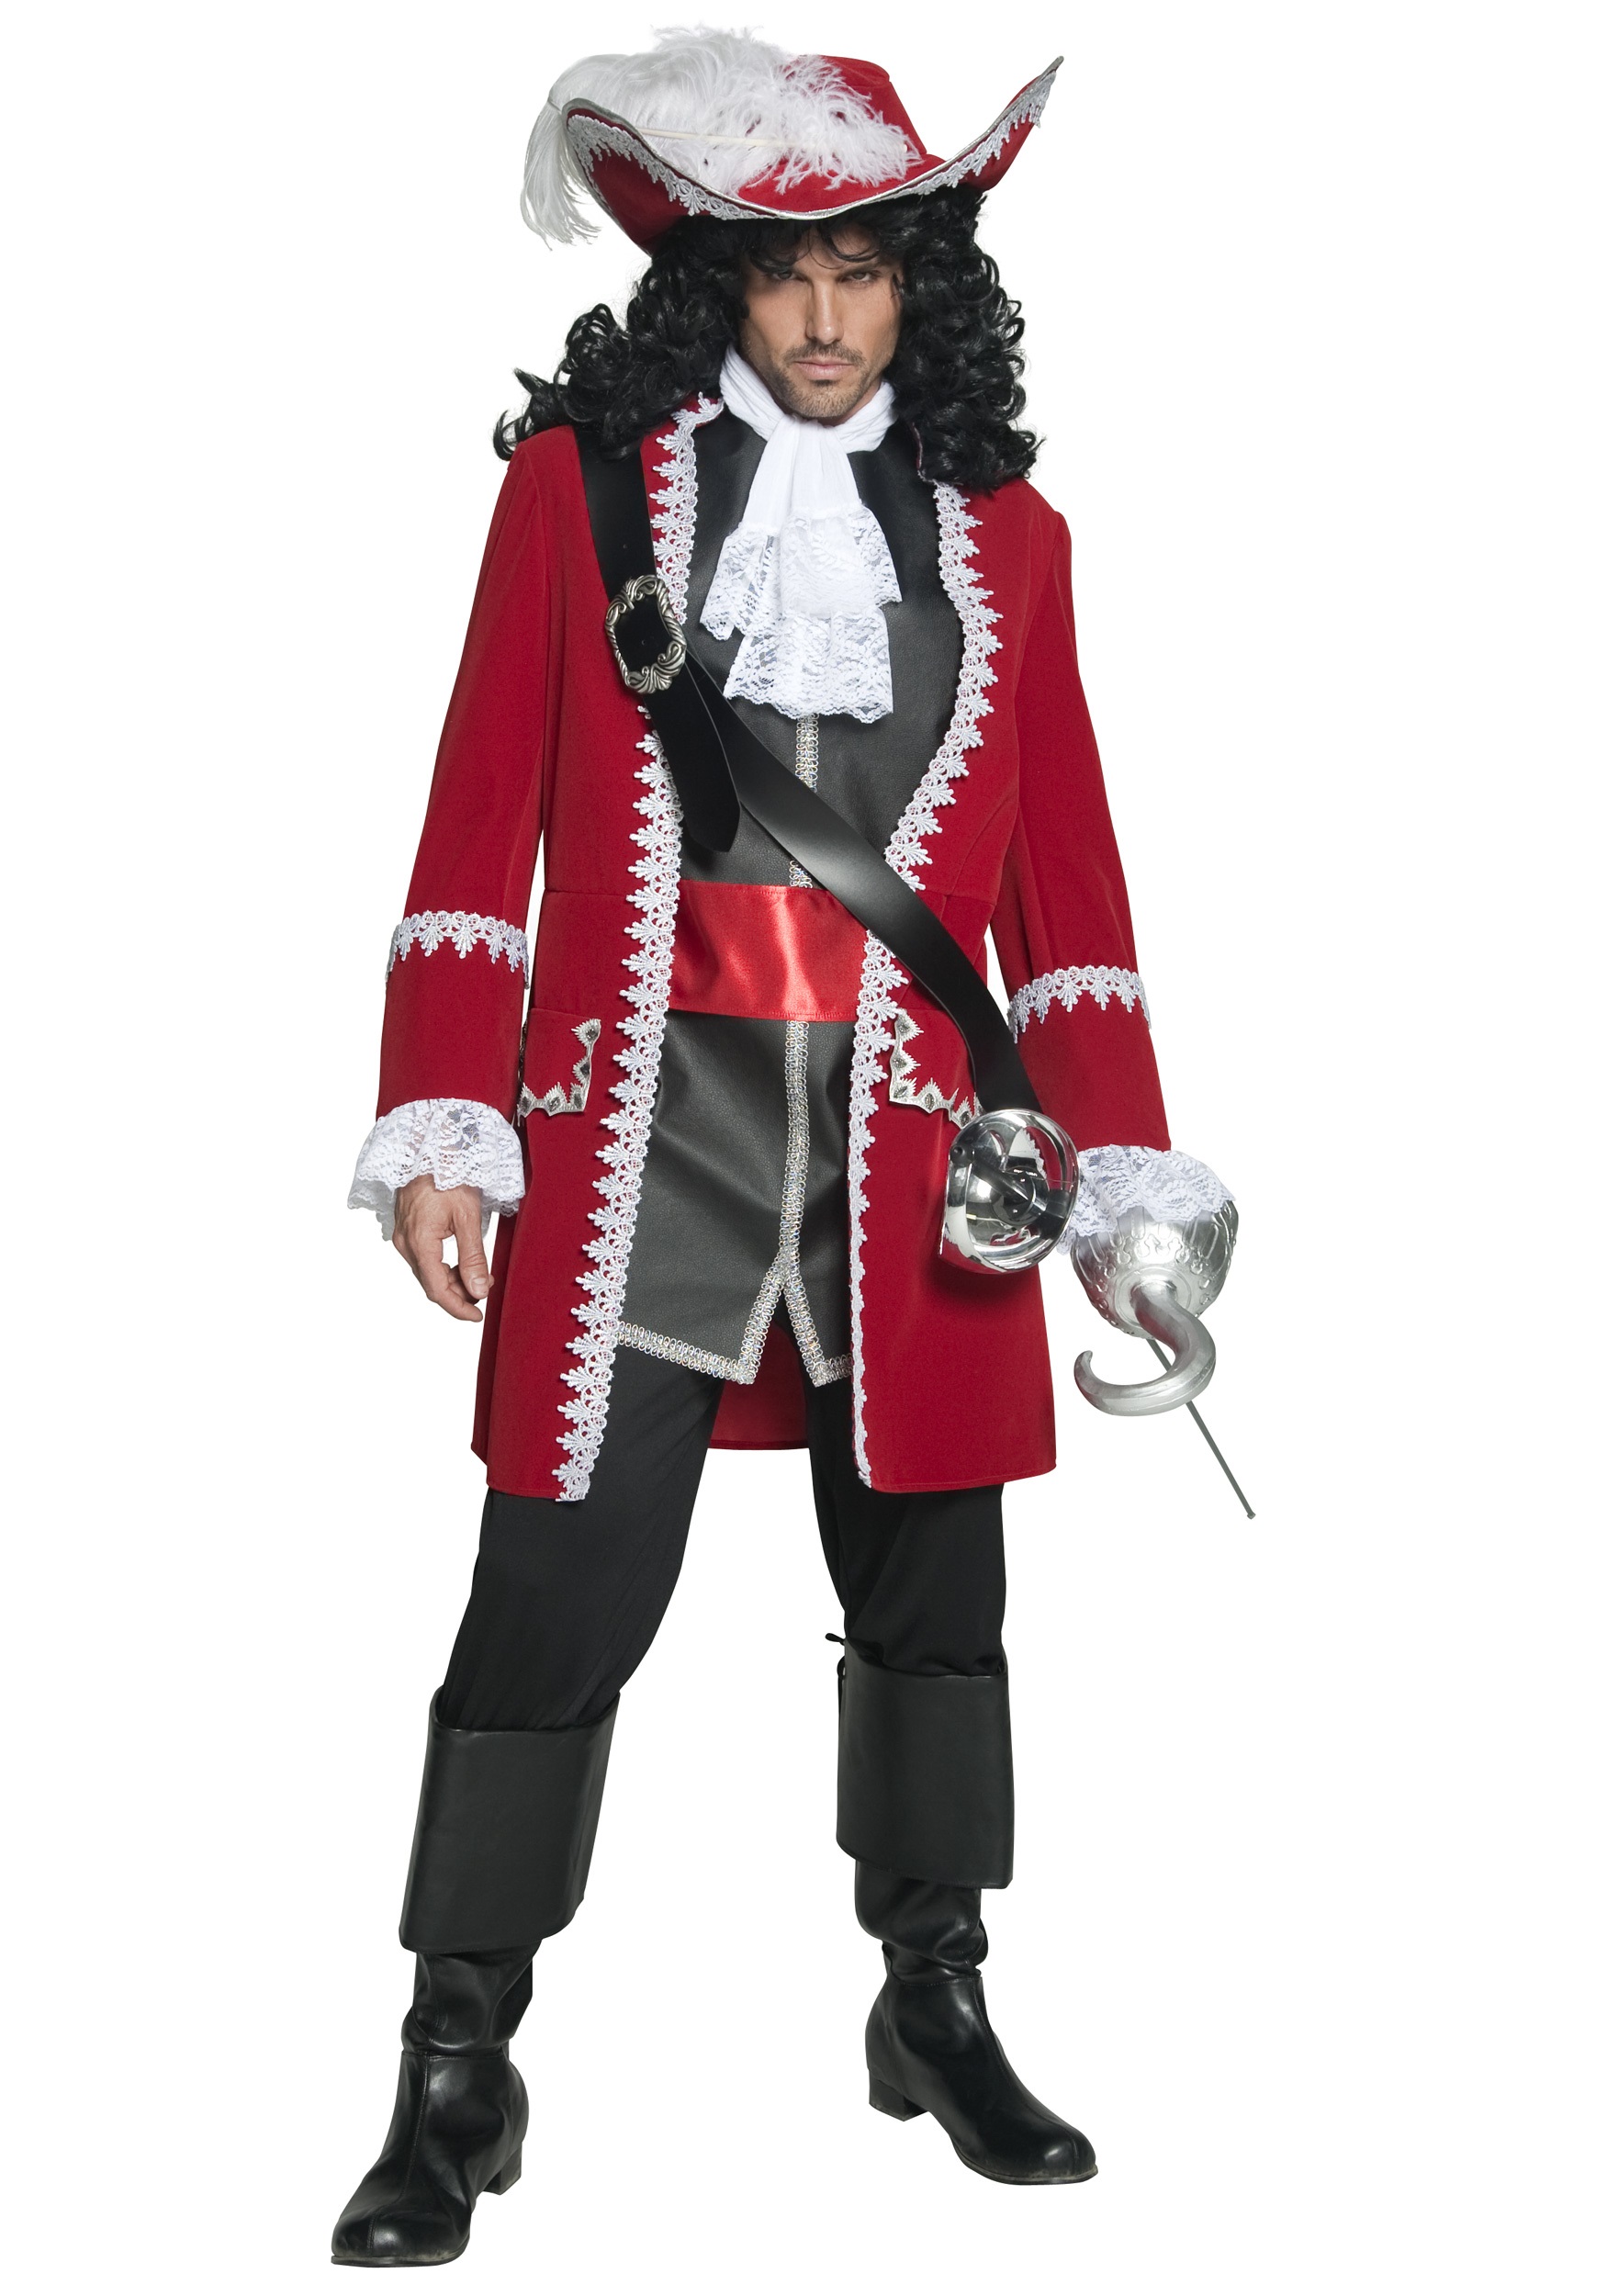 https://images.halloweencostumes.ca/products/10233/1-1/mens-regal-pirate-captain-costume.jpg